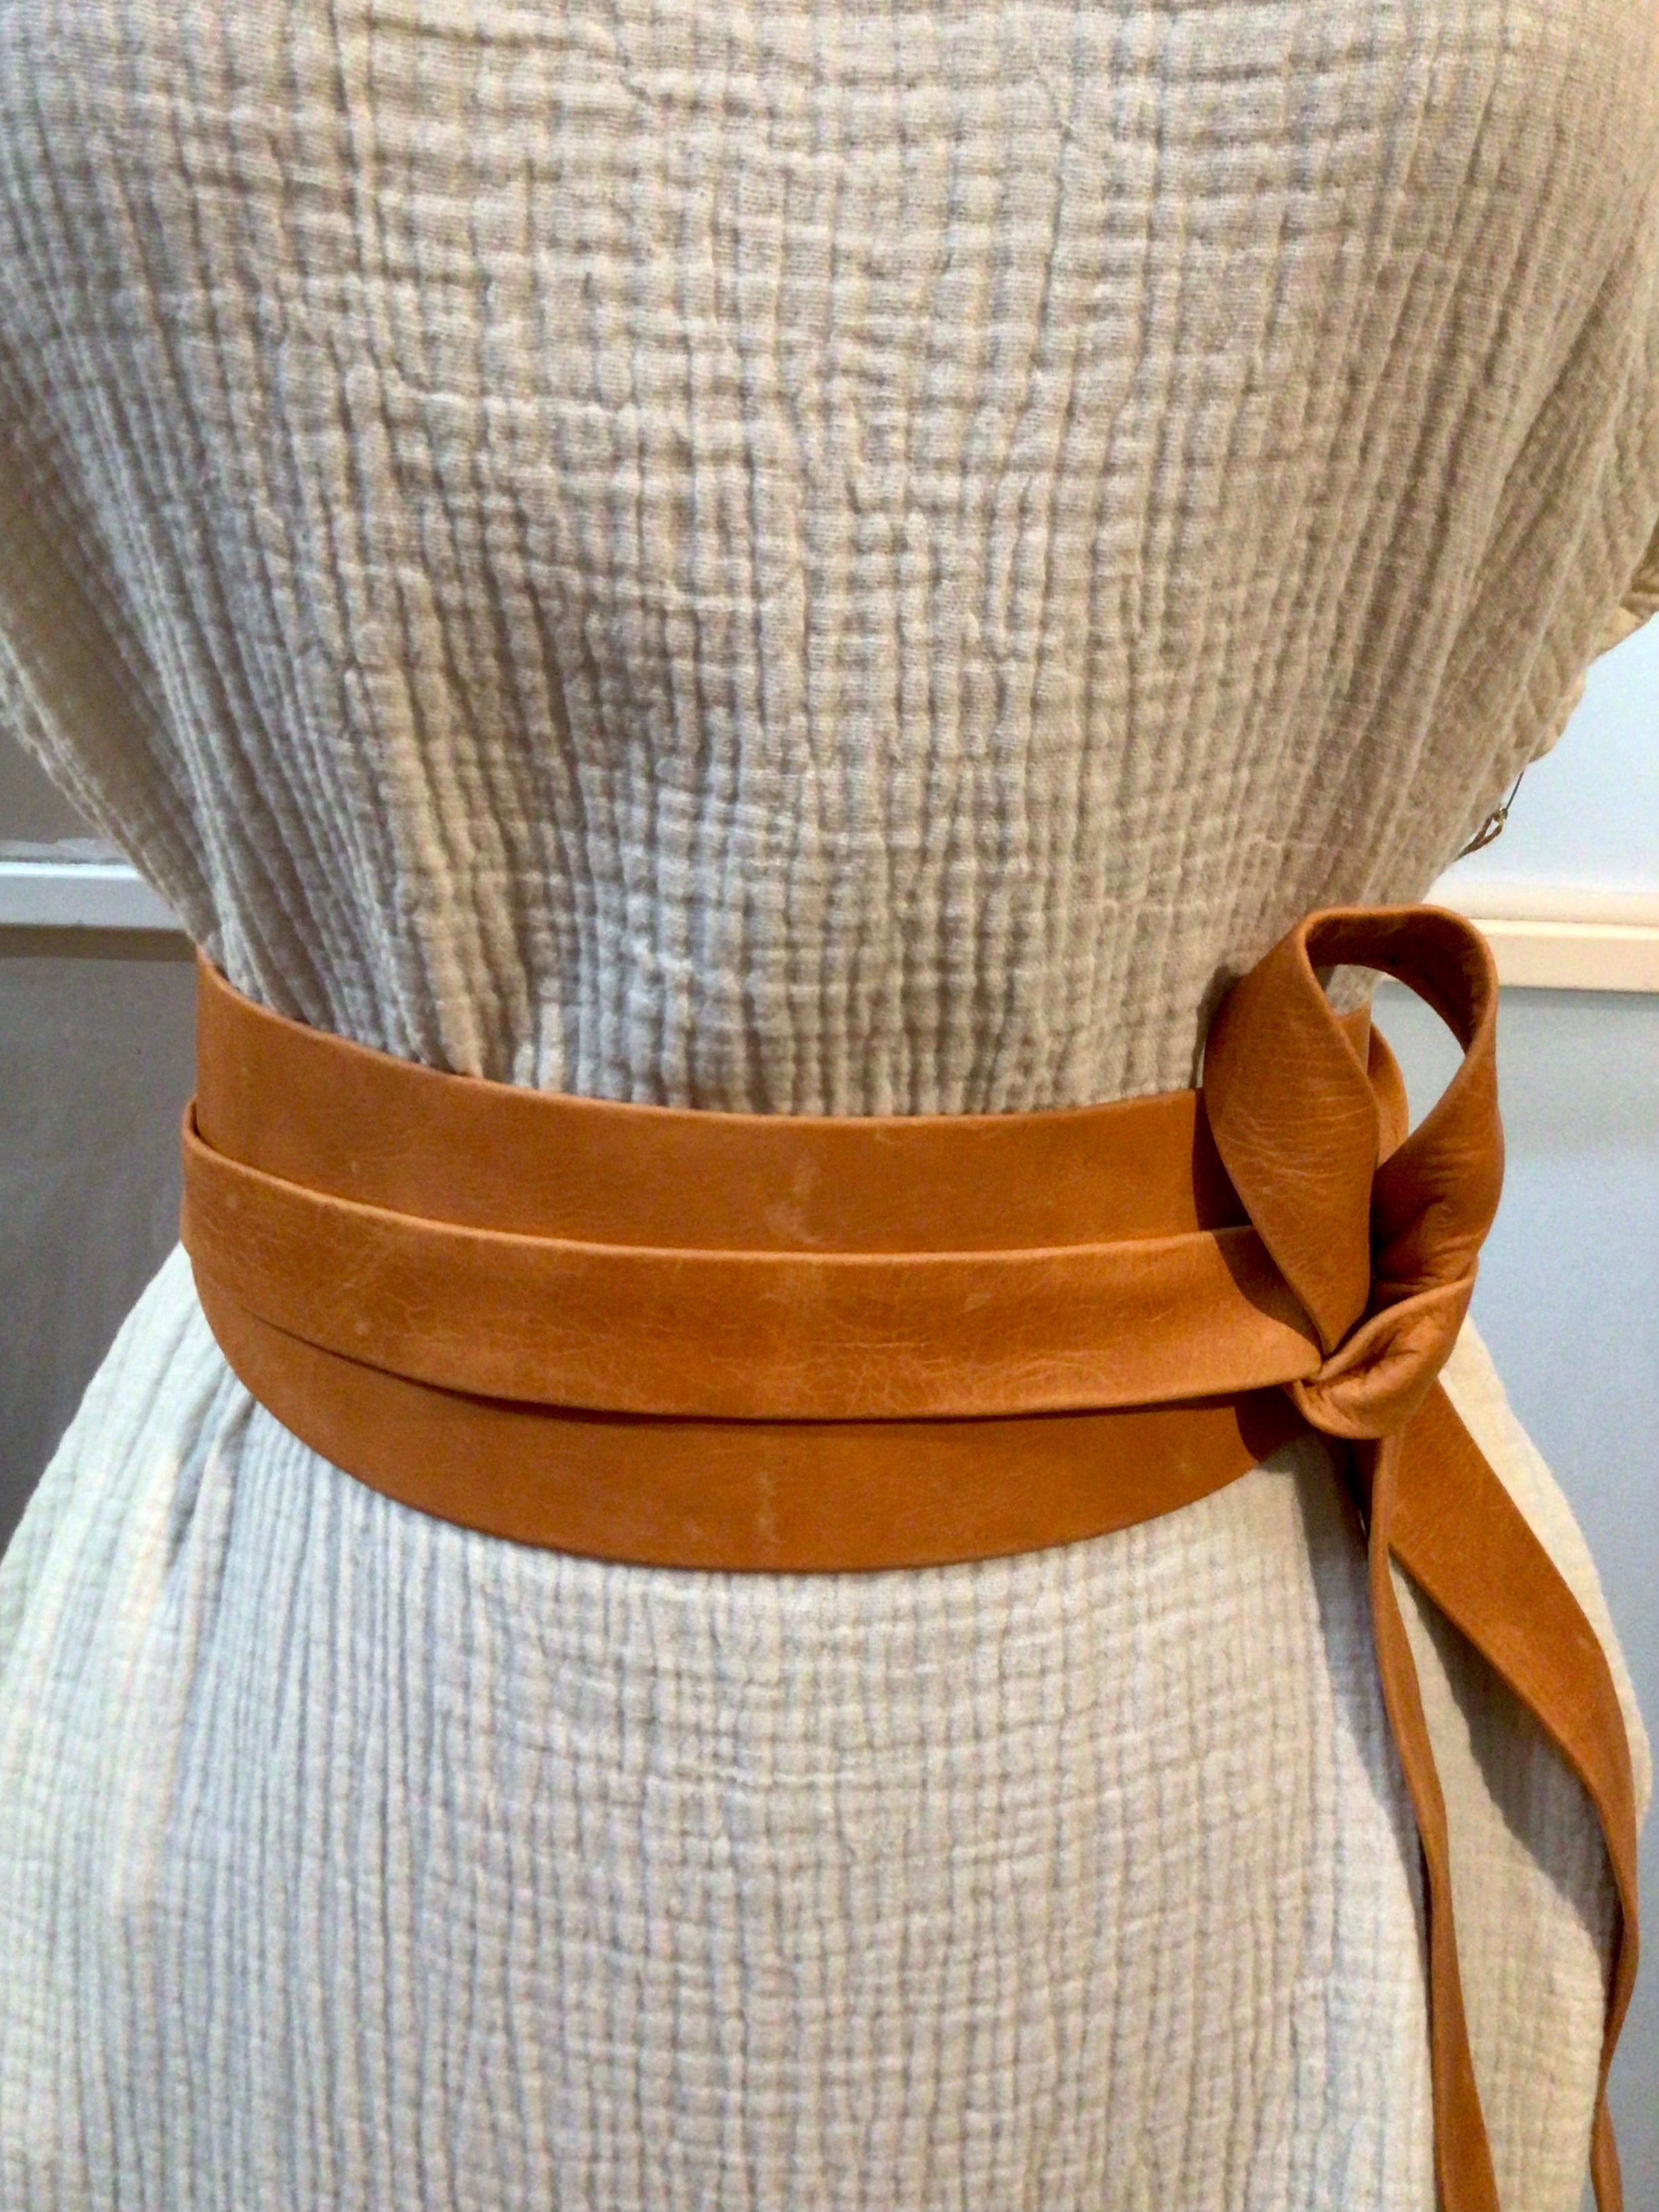 Leather Wrap Belt | Ada Collections